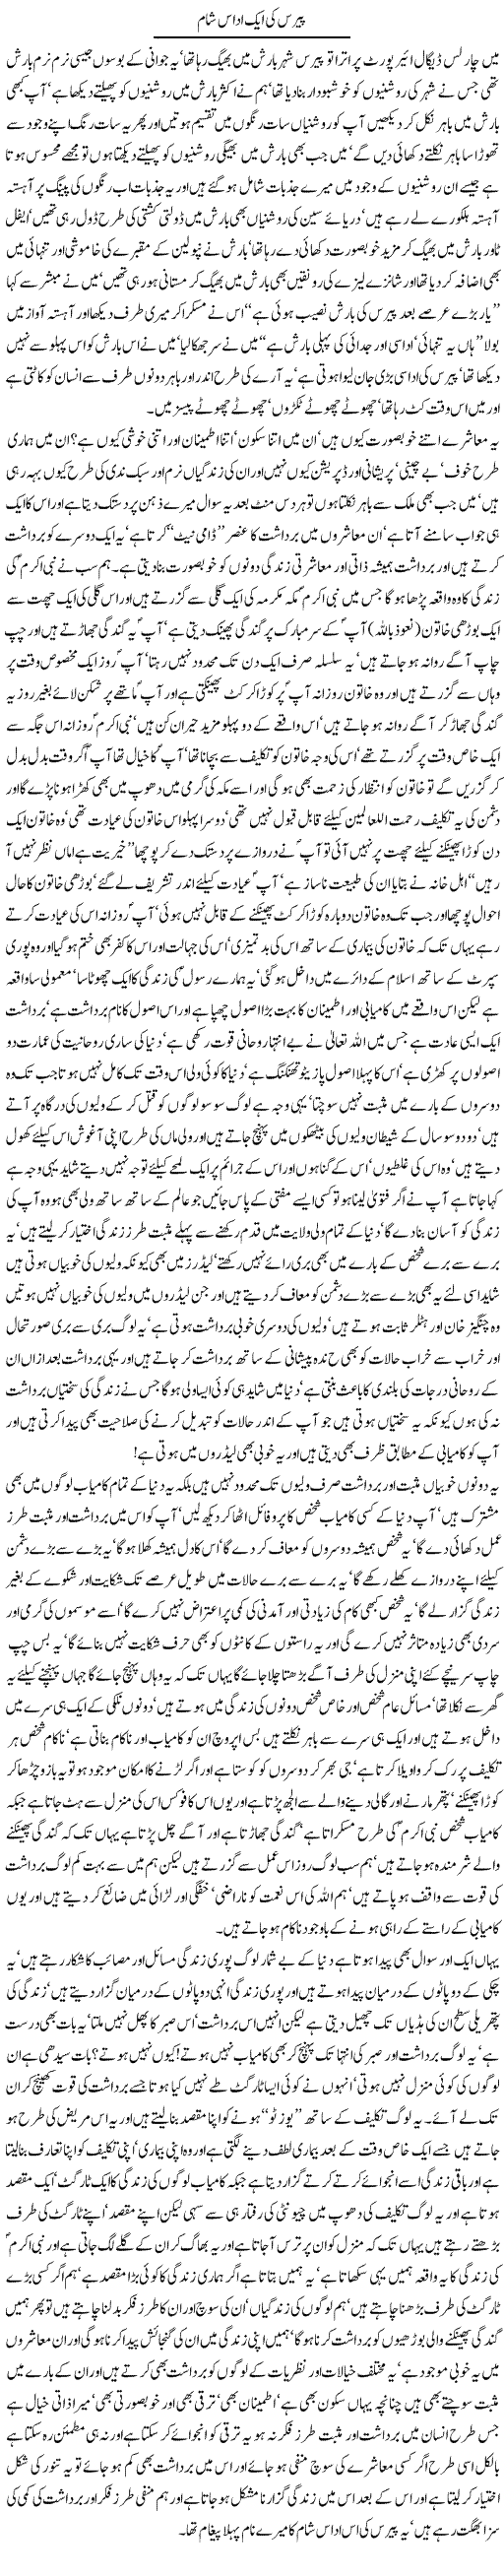 One Evening of Paris Express Column Javed Chaudhry 17 October 2010